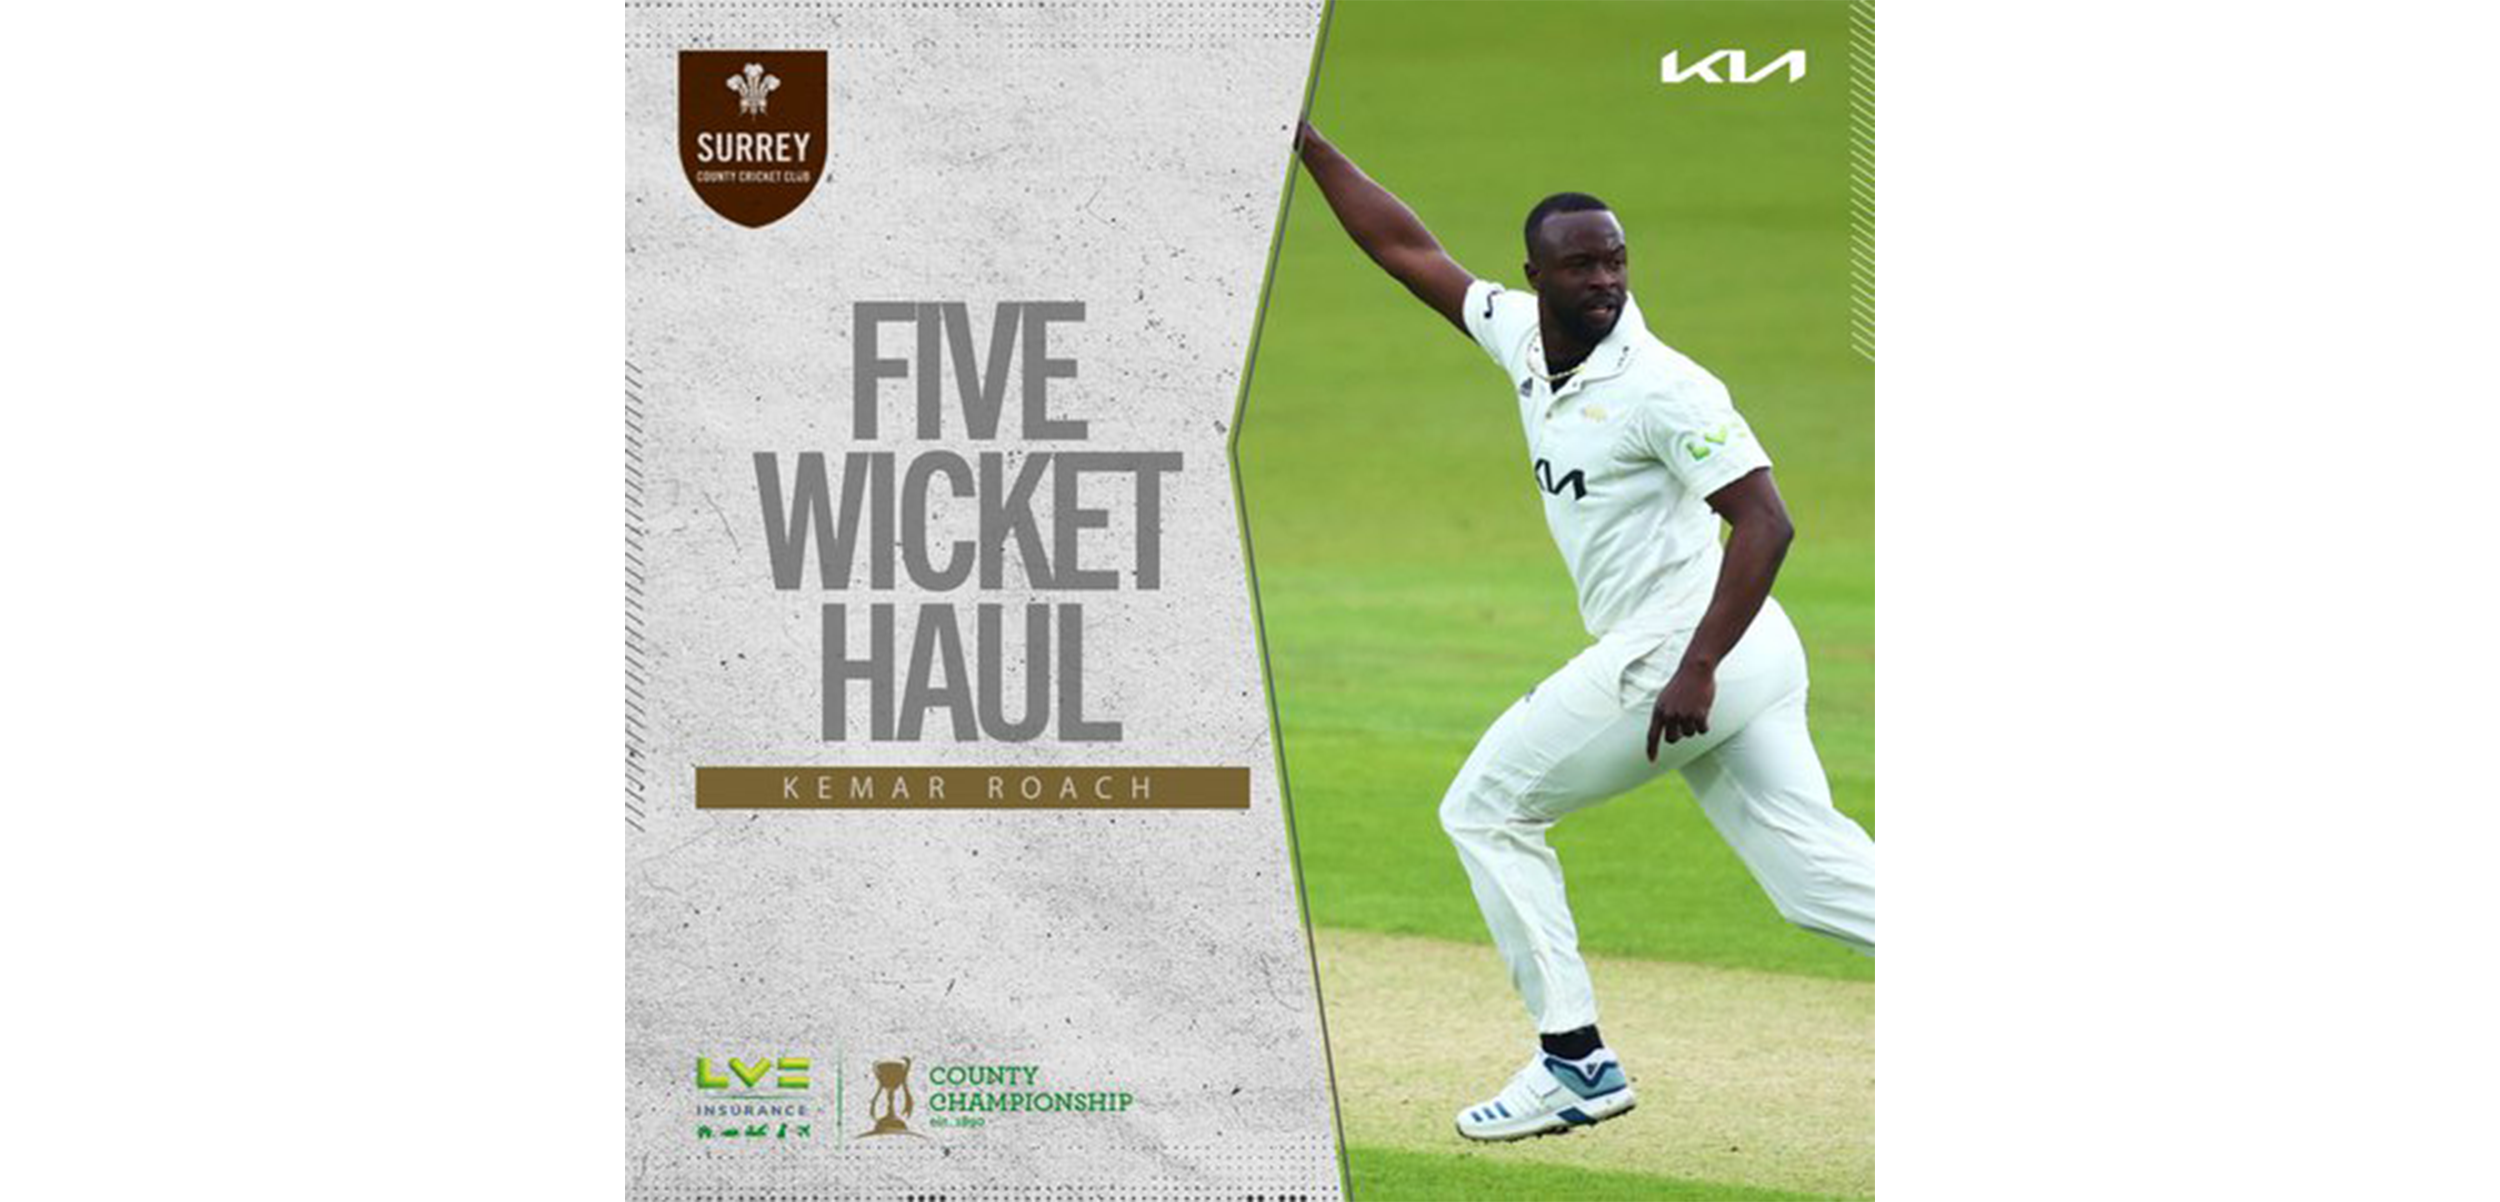 CWI: South Africa look out! Kemar Roach is coming!